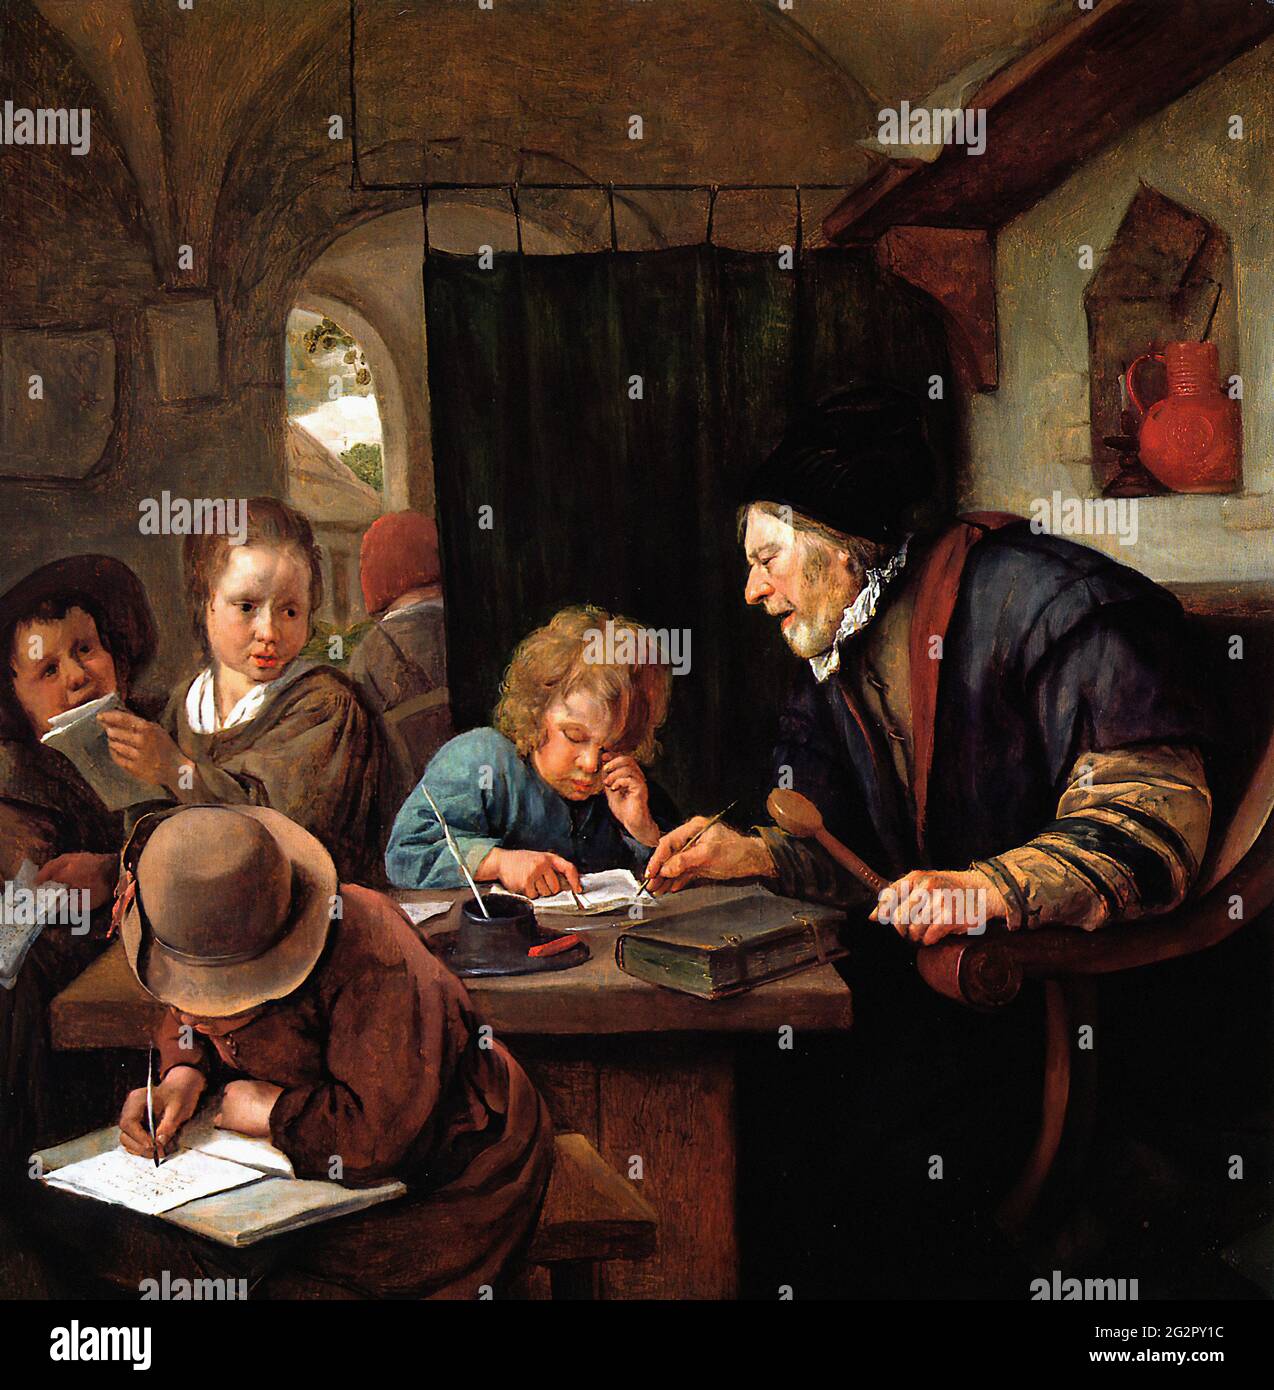 Jan steen school hi-res stock photography and images - Alamy